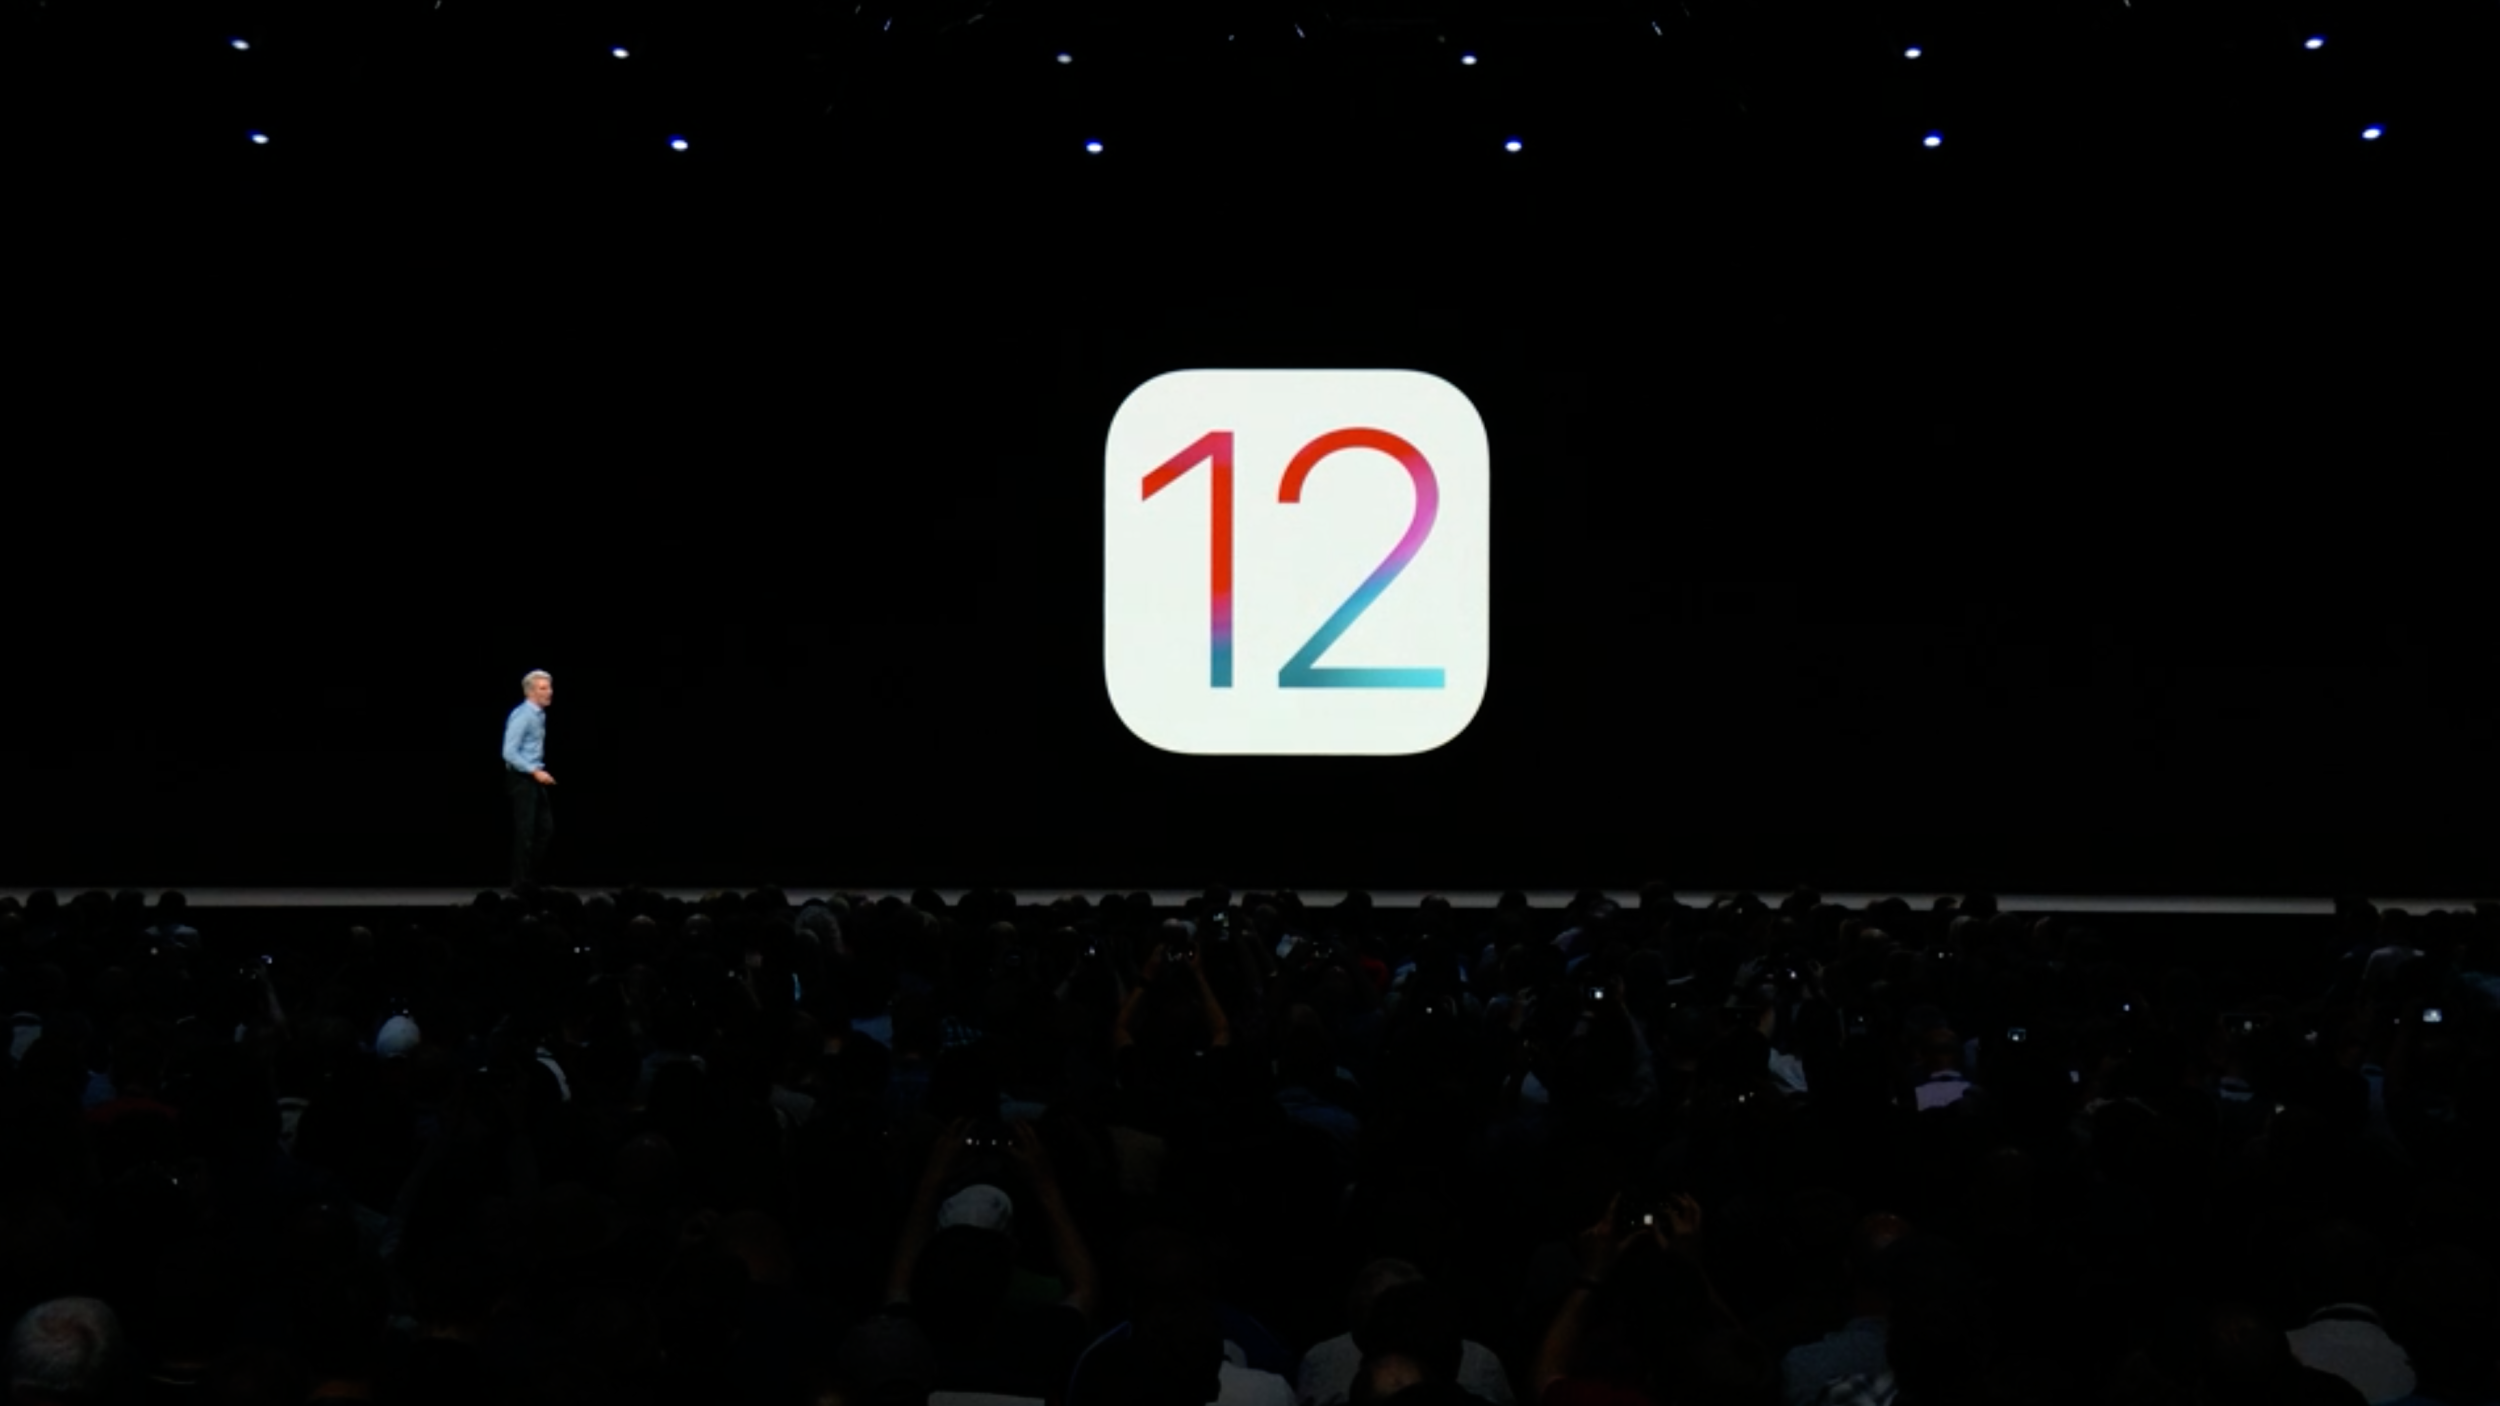 iOS 12 Includes Support for Reporting Unwanted Texts & Calls as Spam